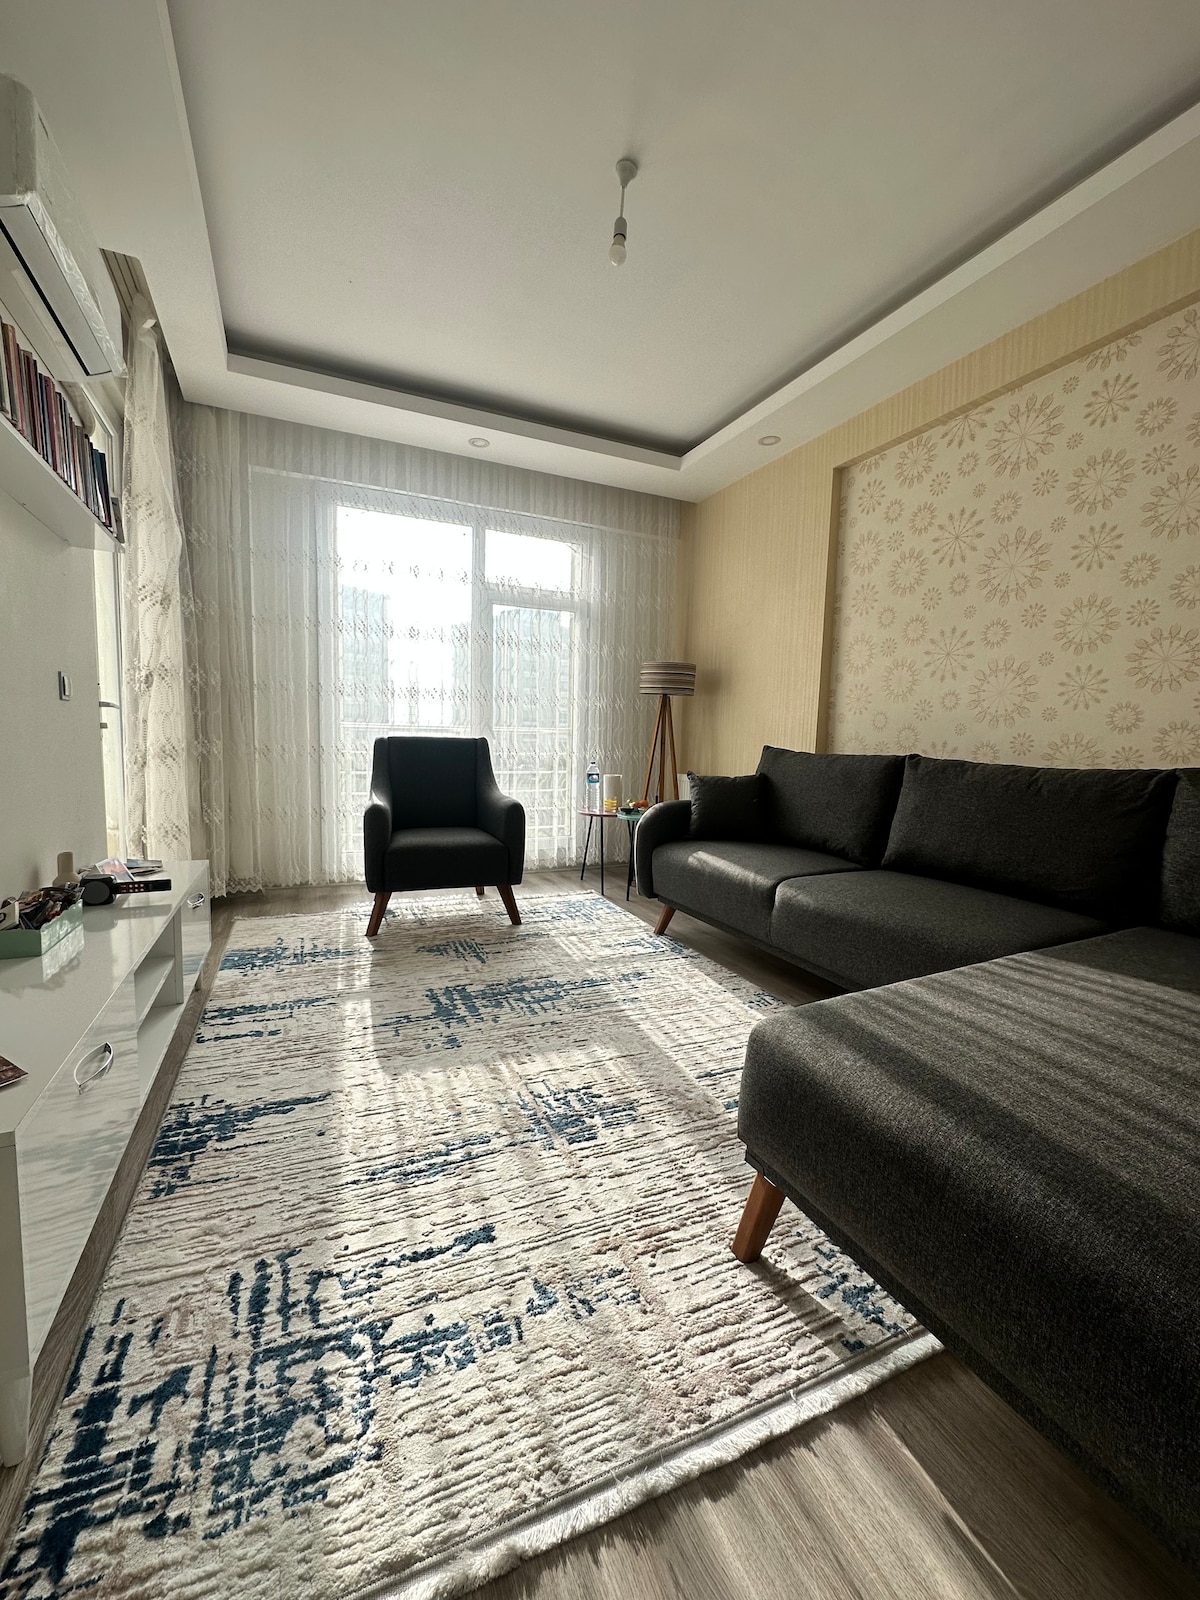 Private room. Close to bus terminal and airport